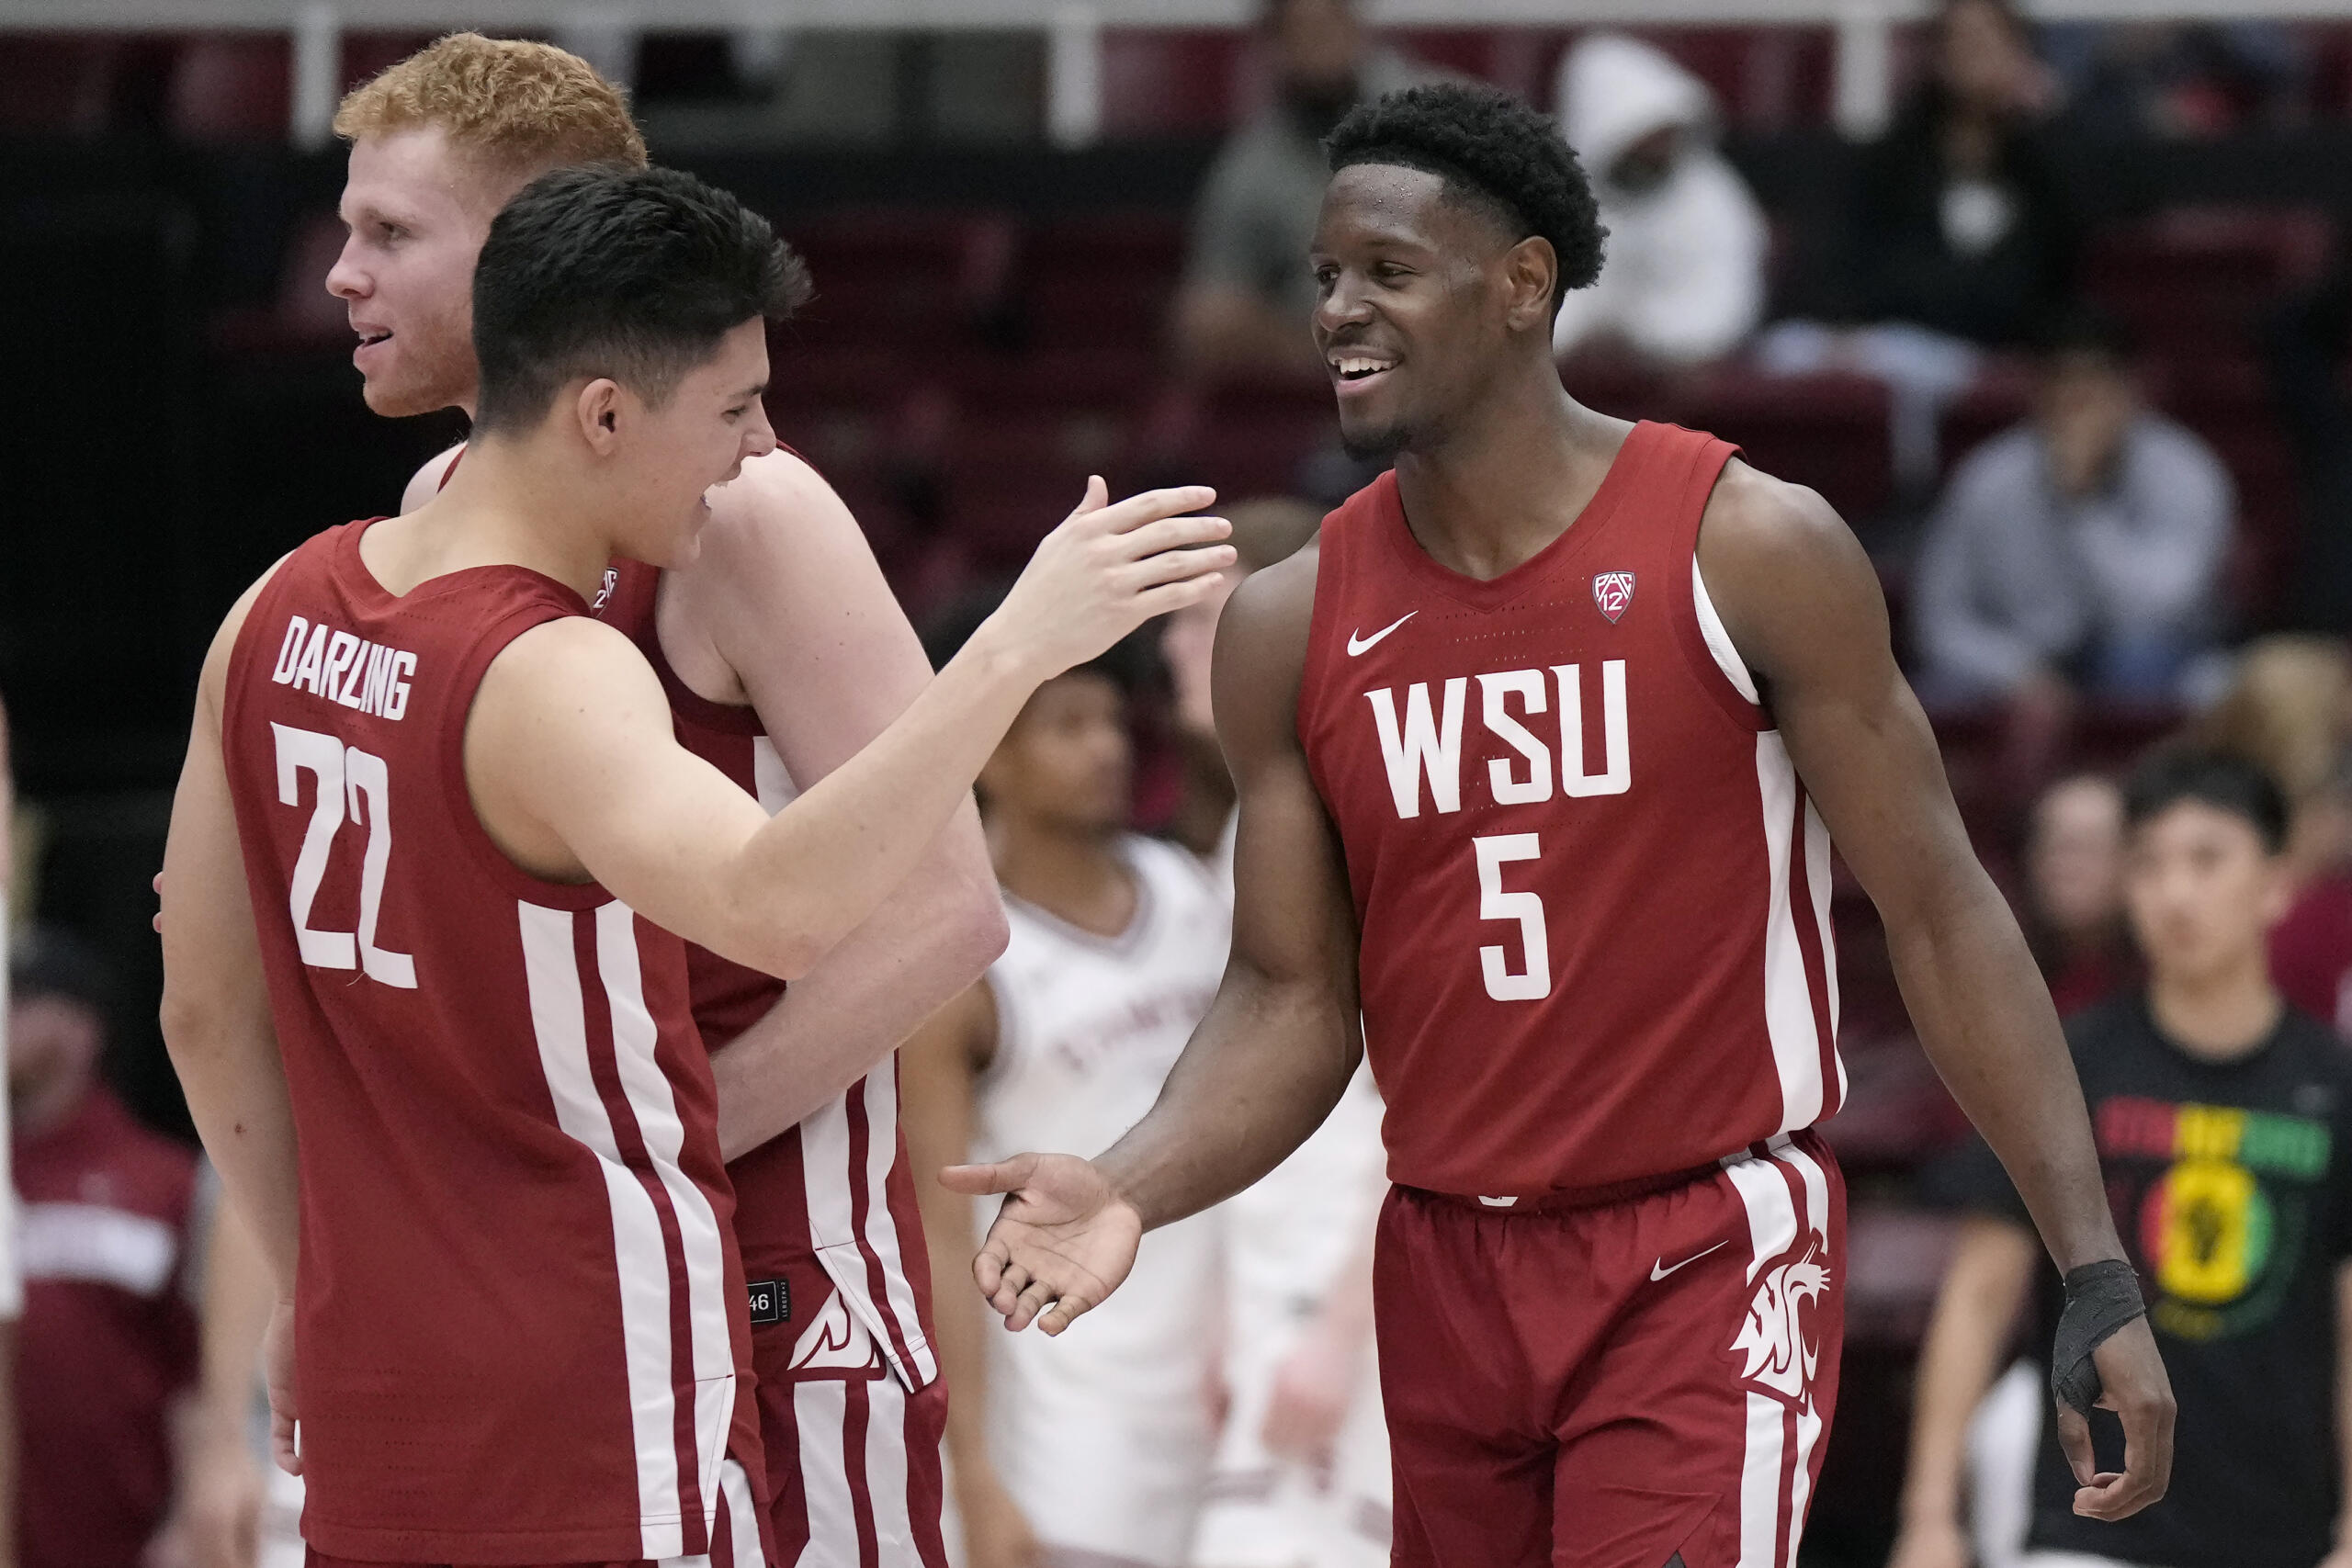 Washington State guard Dylan Darling (22) celebrates with guard TJ Bamba (5) and guard Jabe Mullins after the team defeated Stanford in an NCAA college basketball game in Stanford, Calif., Thursday, Feb. 23, 2023.